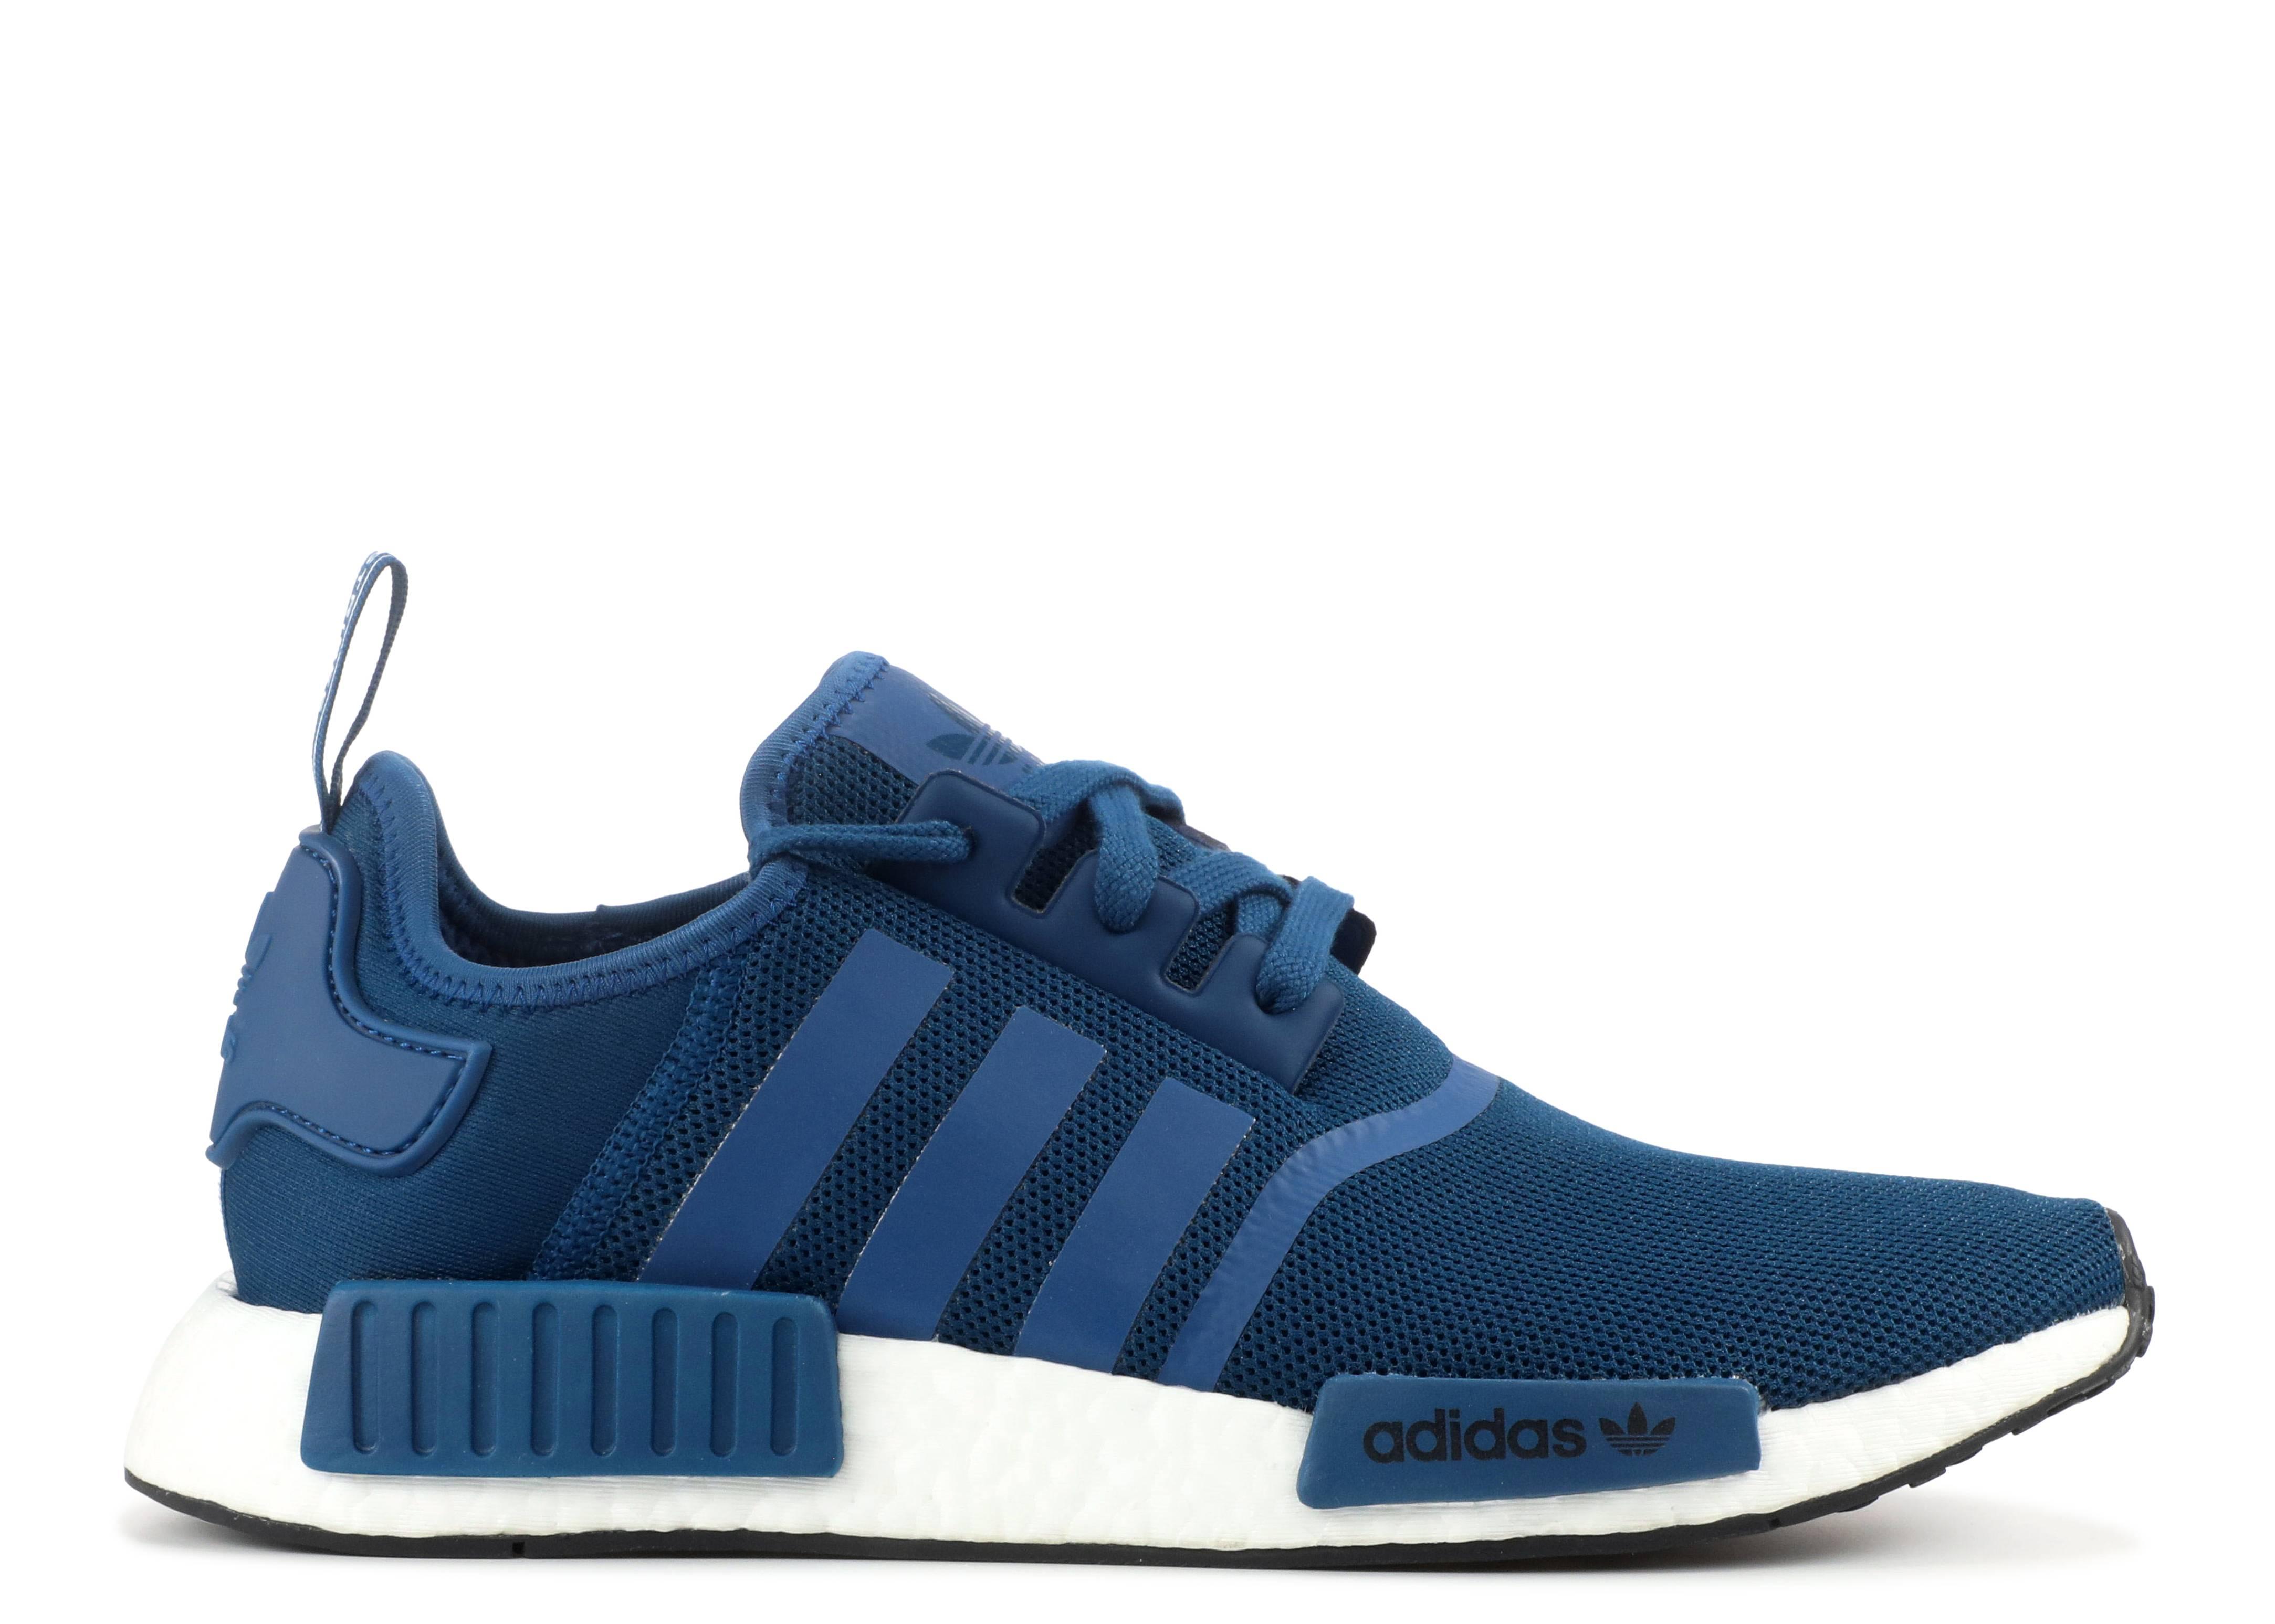 adidas Nmd R1 Blue Night for Men - Save 